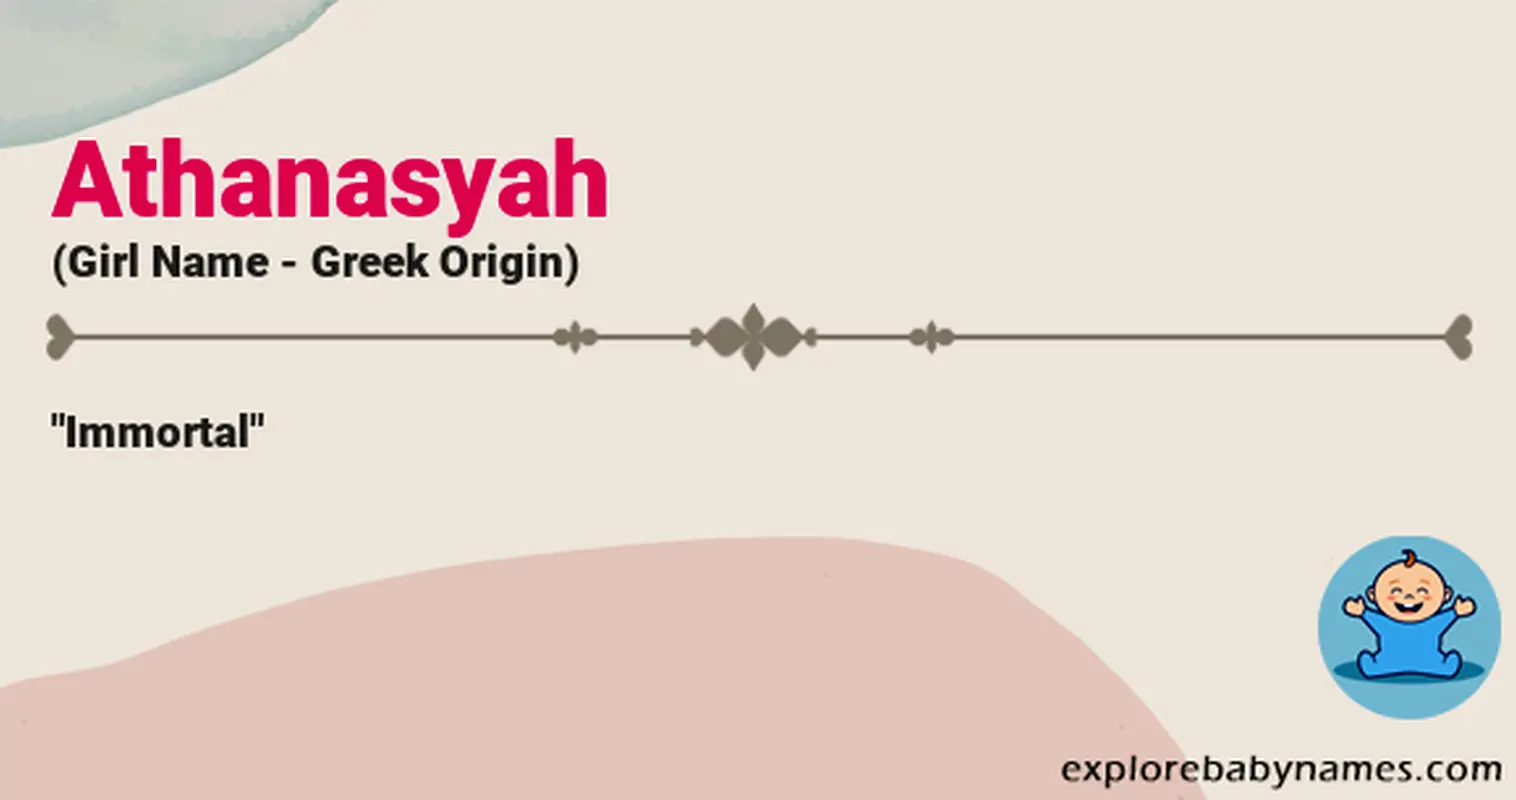 Meaning of Athanasyah